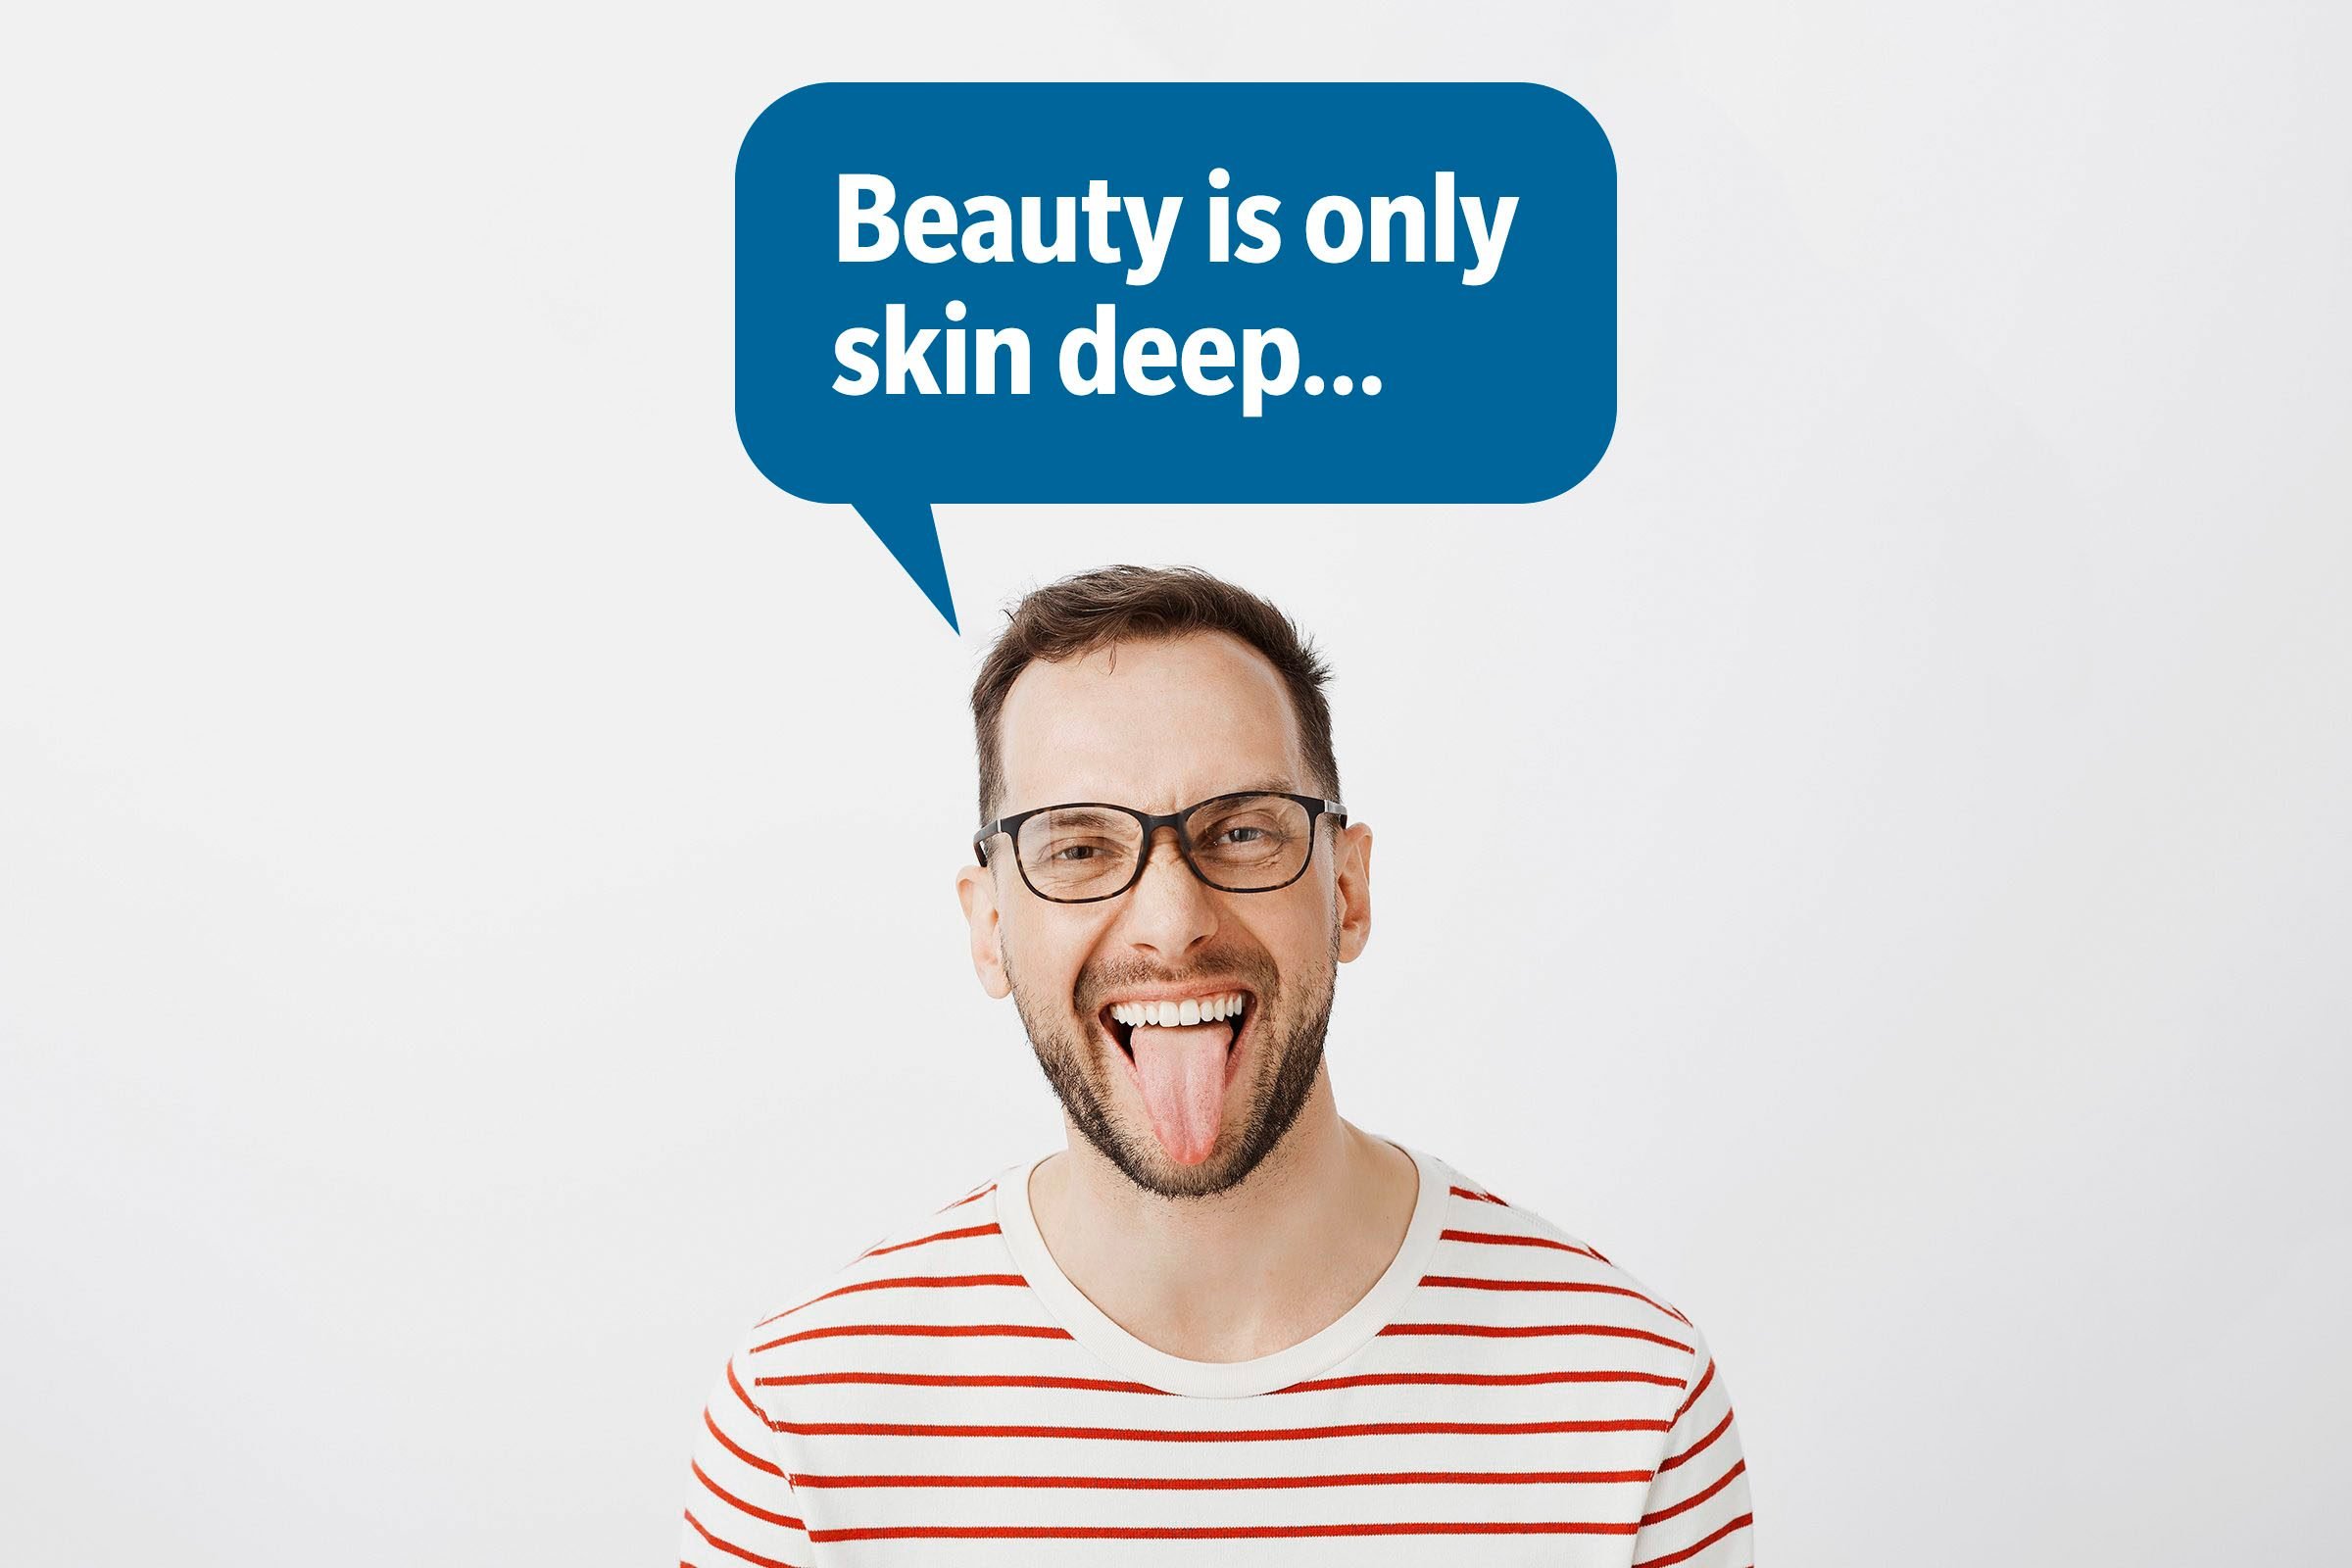 Man with tongue out delivering a comeback roast, speech bubble text: "Beauty is only skin deep..."